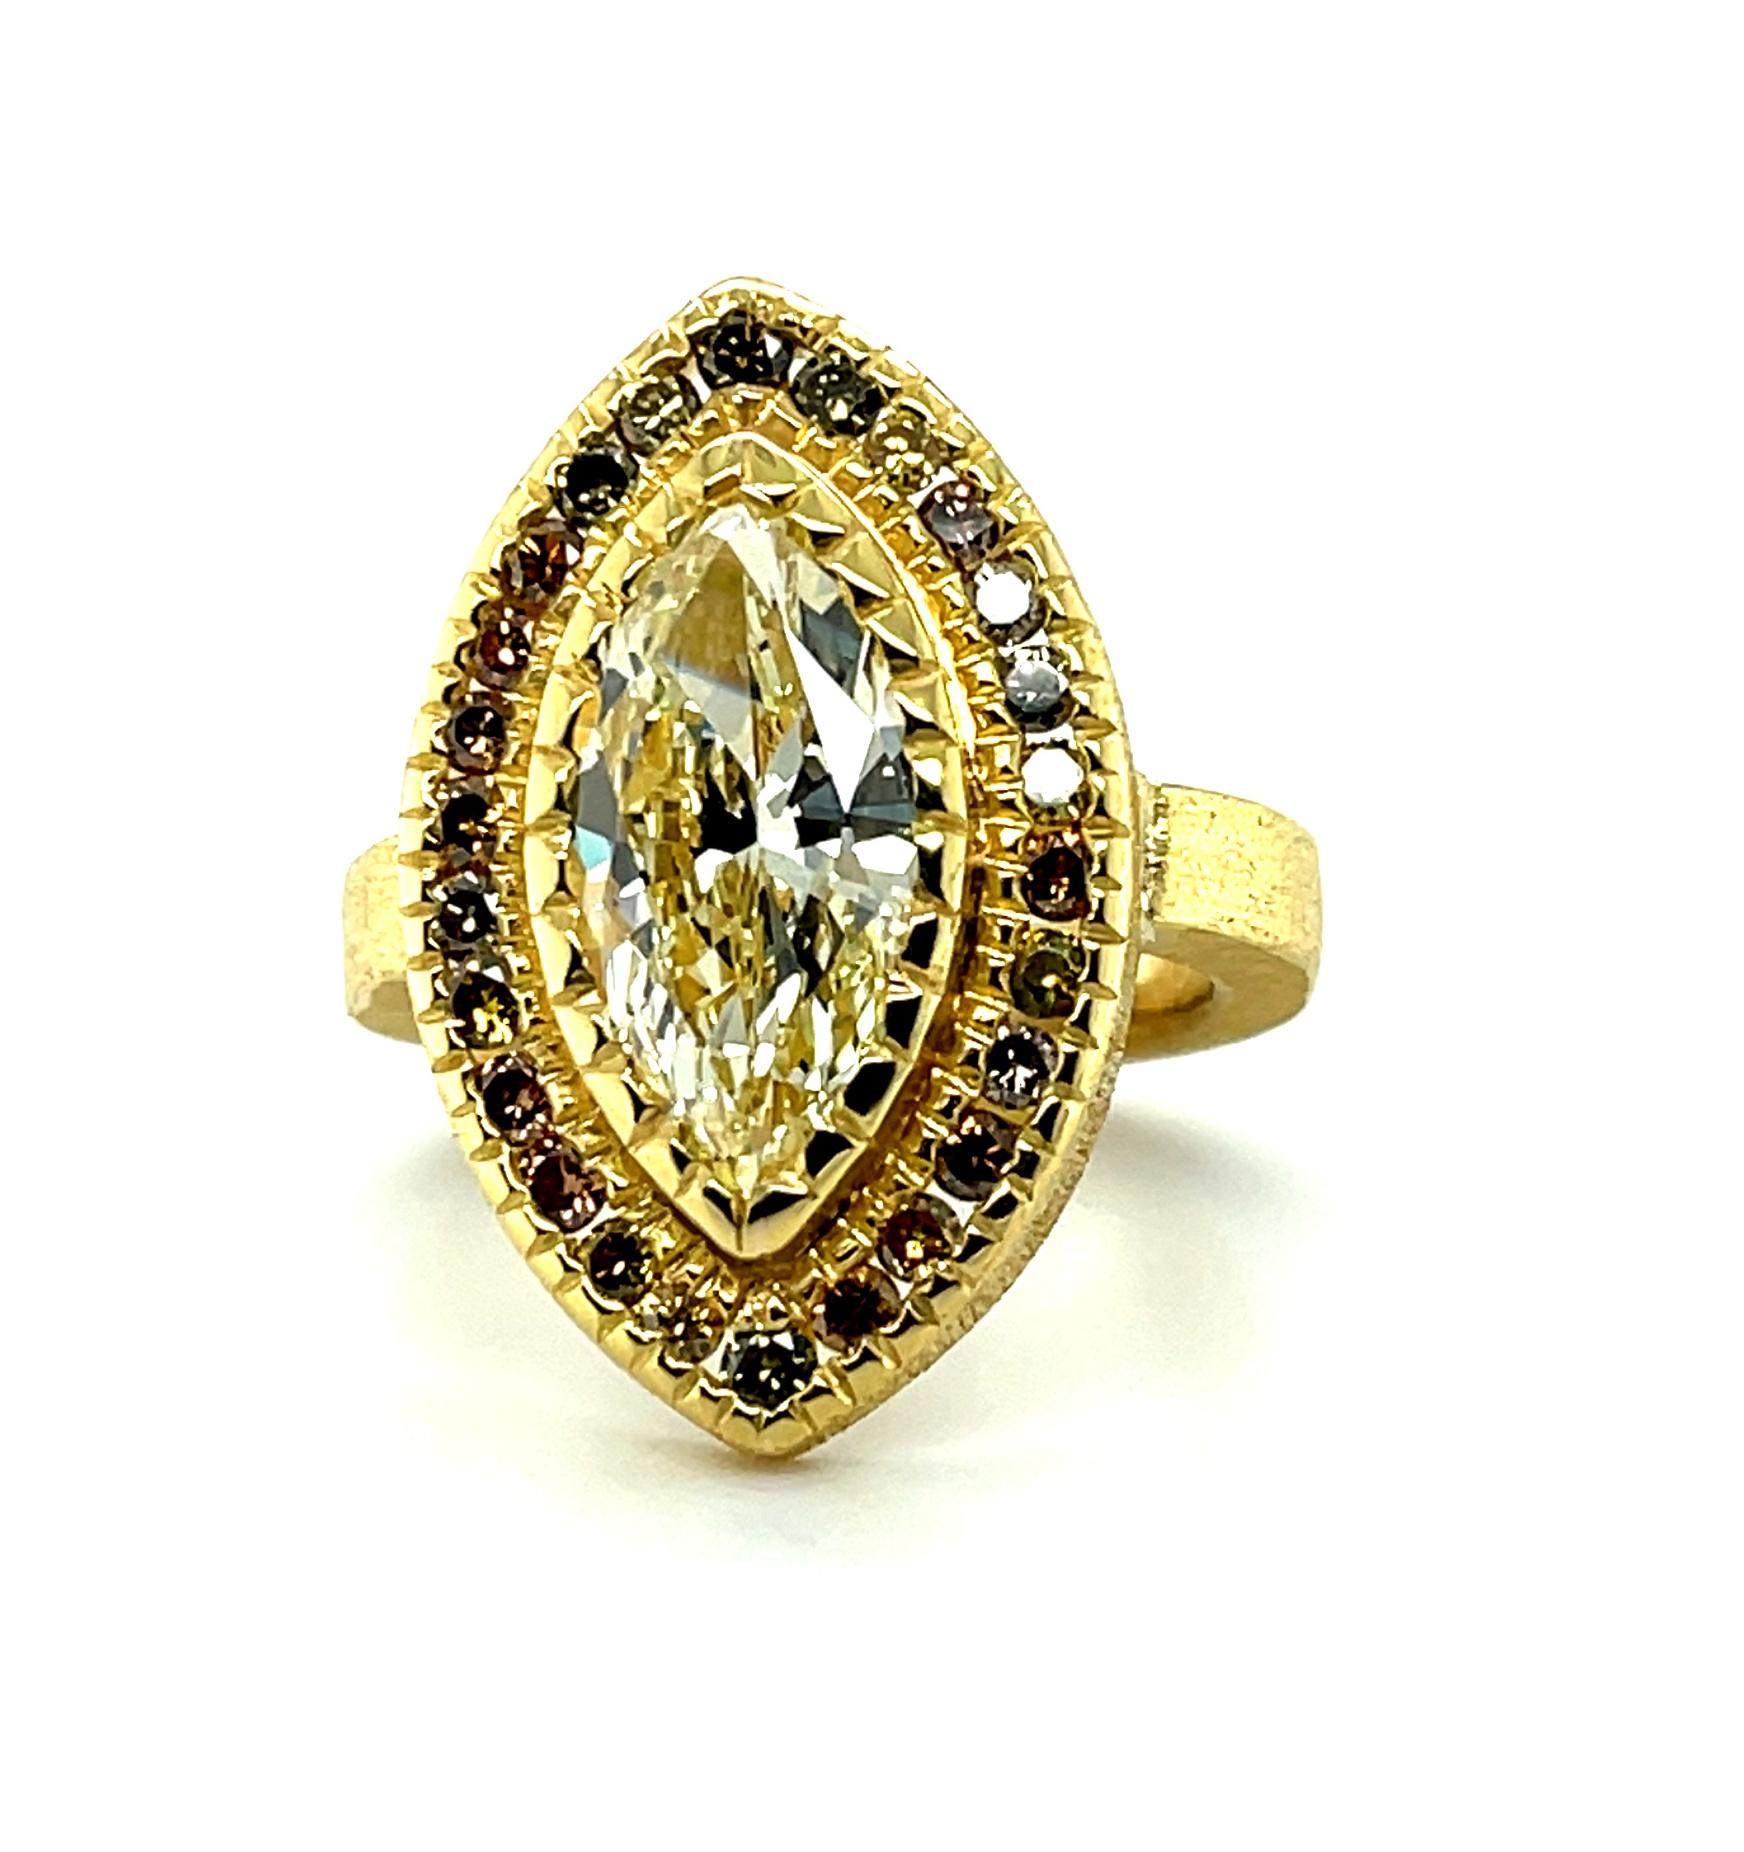 This exquisitely handcrafted 22k yellow gold ring features a gorgeous marquise-shaped fancy light yellow diamond weighing 3.54 carats! It is an impressive gem with VS-1 clarity and extraordinary brilliance, set in precious, high karat gold to show